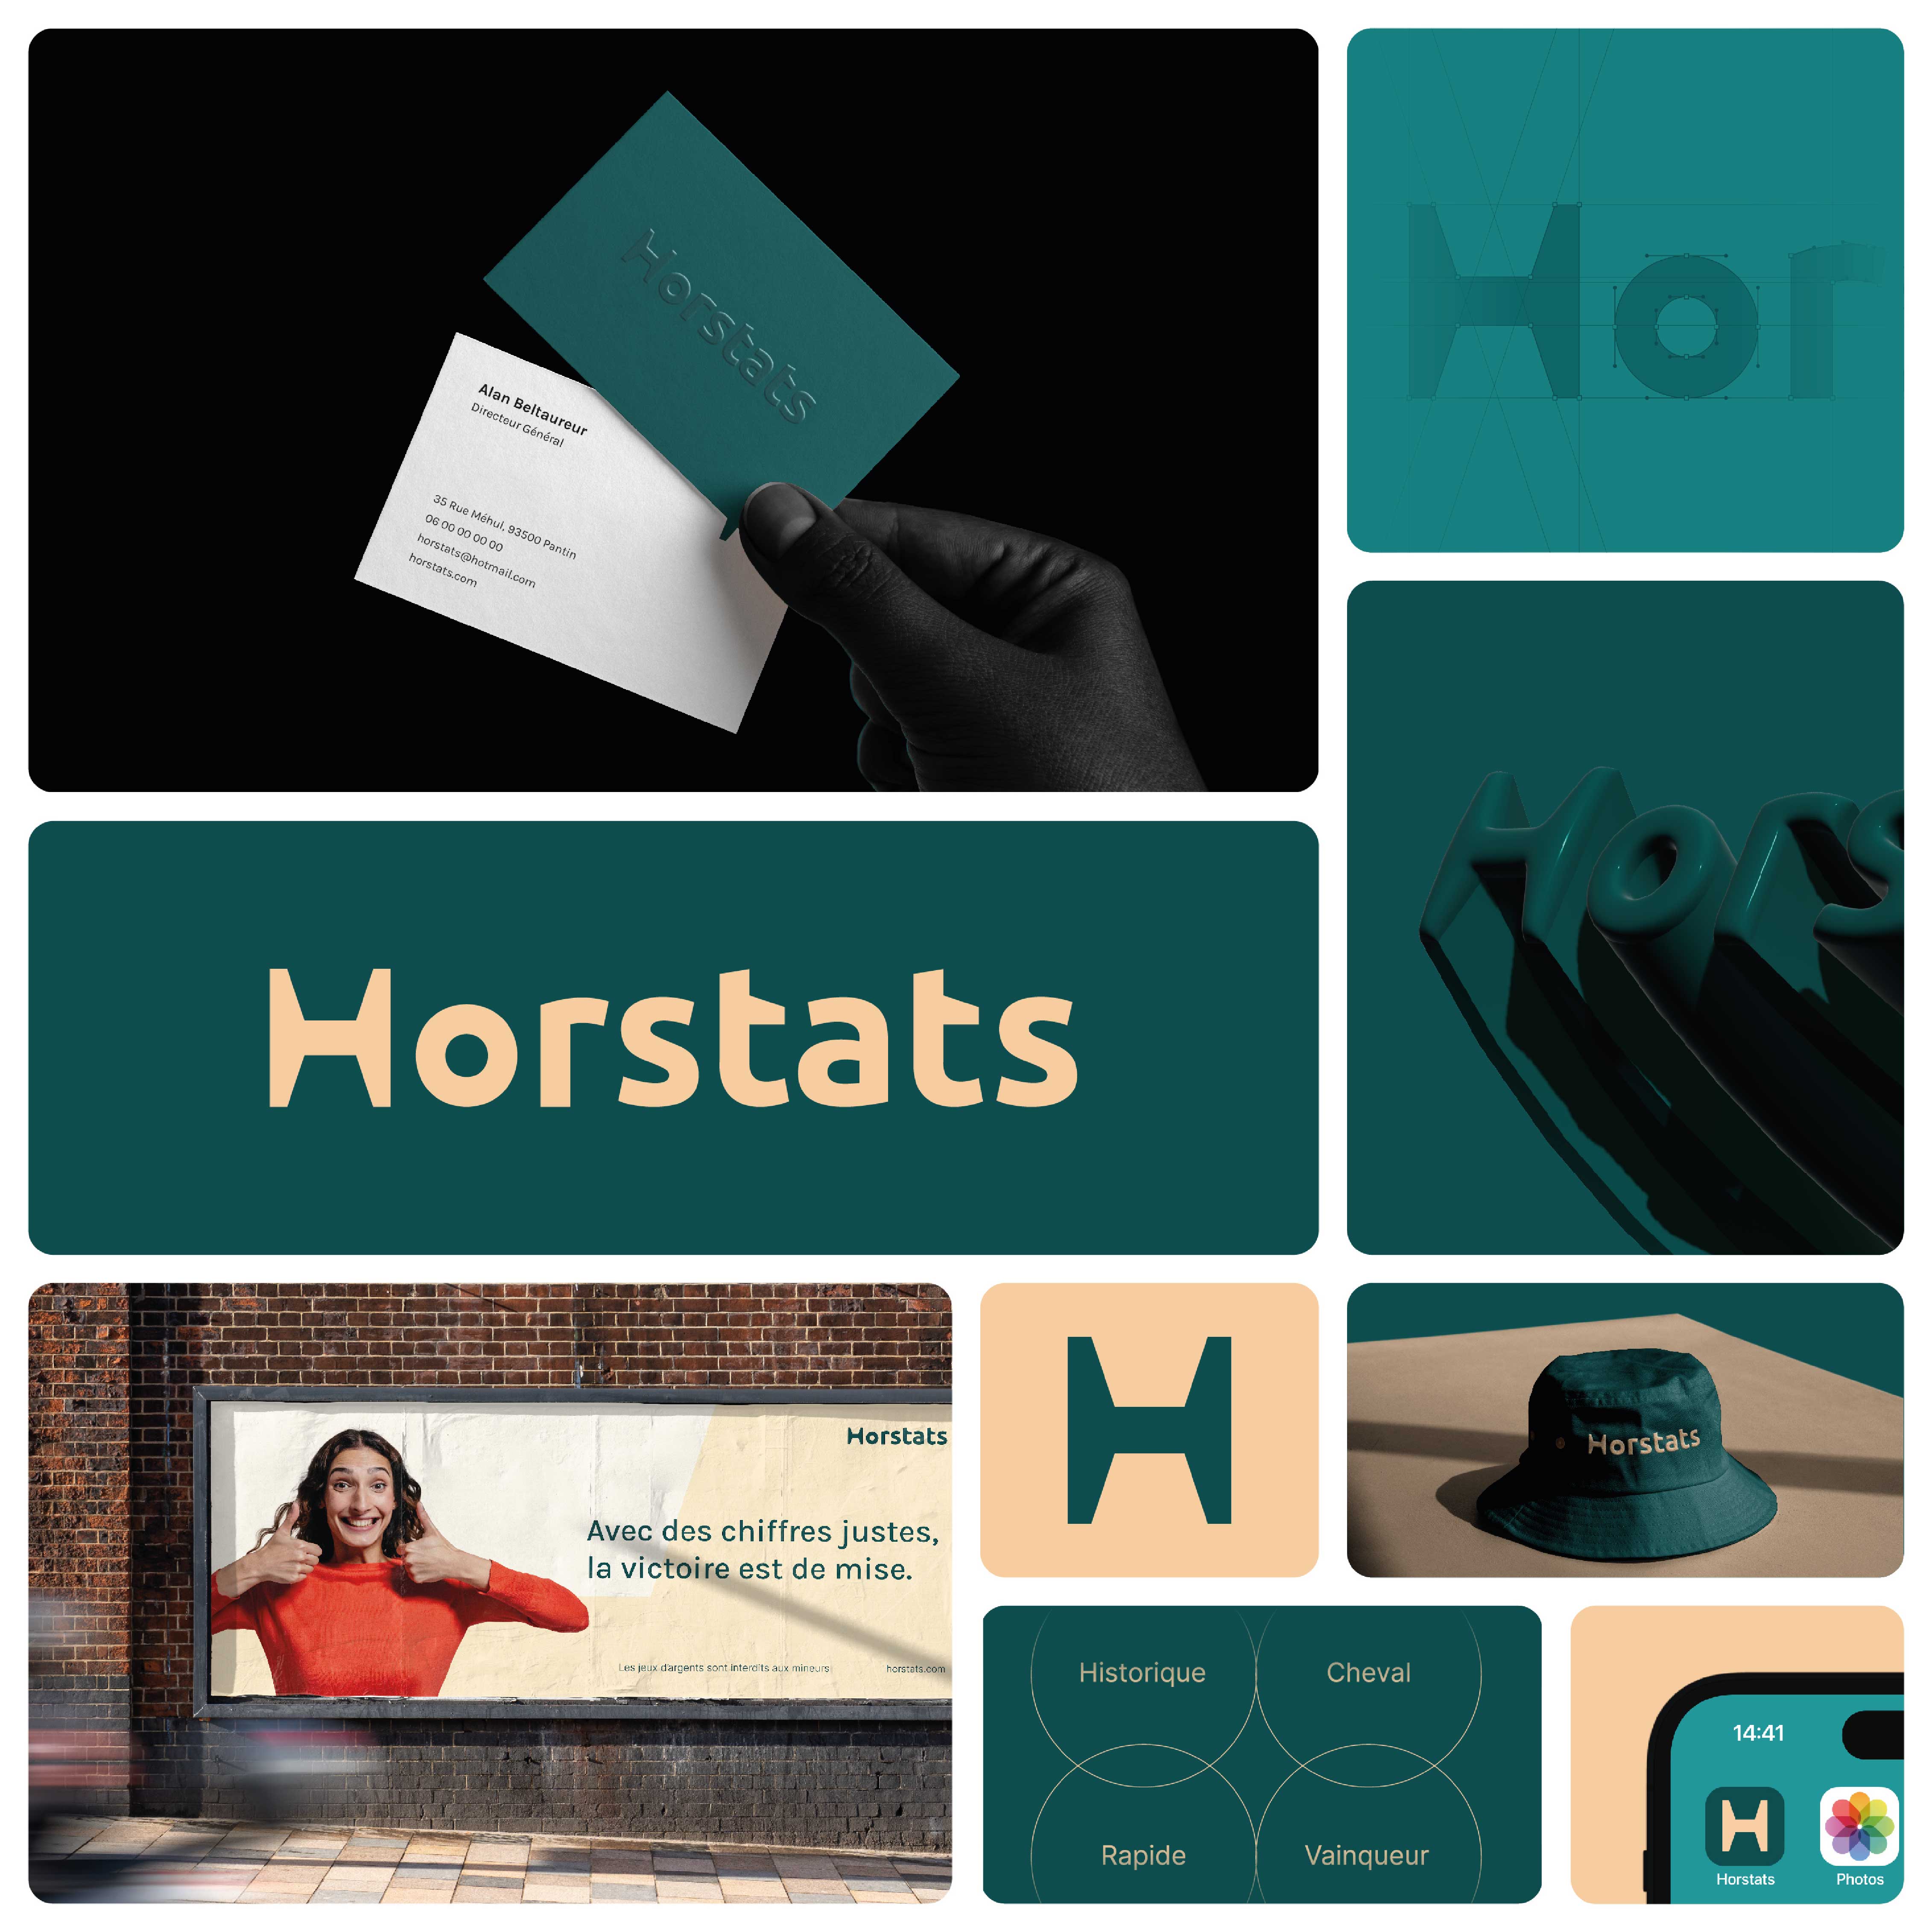 Sombodesign Help Horstats Design a Better Betting Experience for Horse Racing Enthusiasts